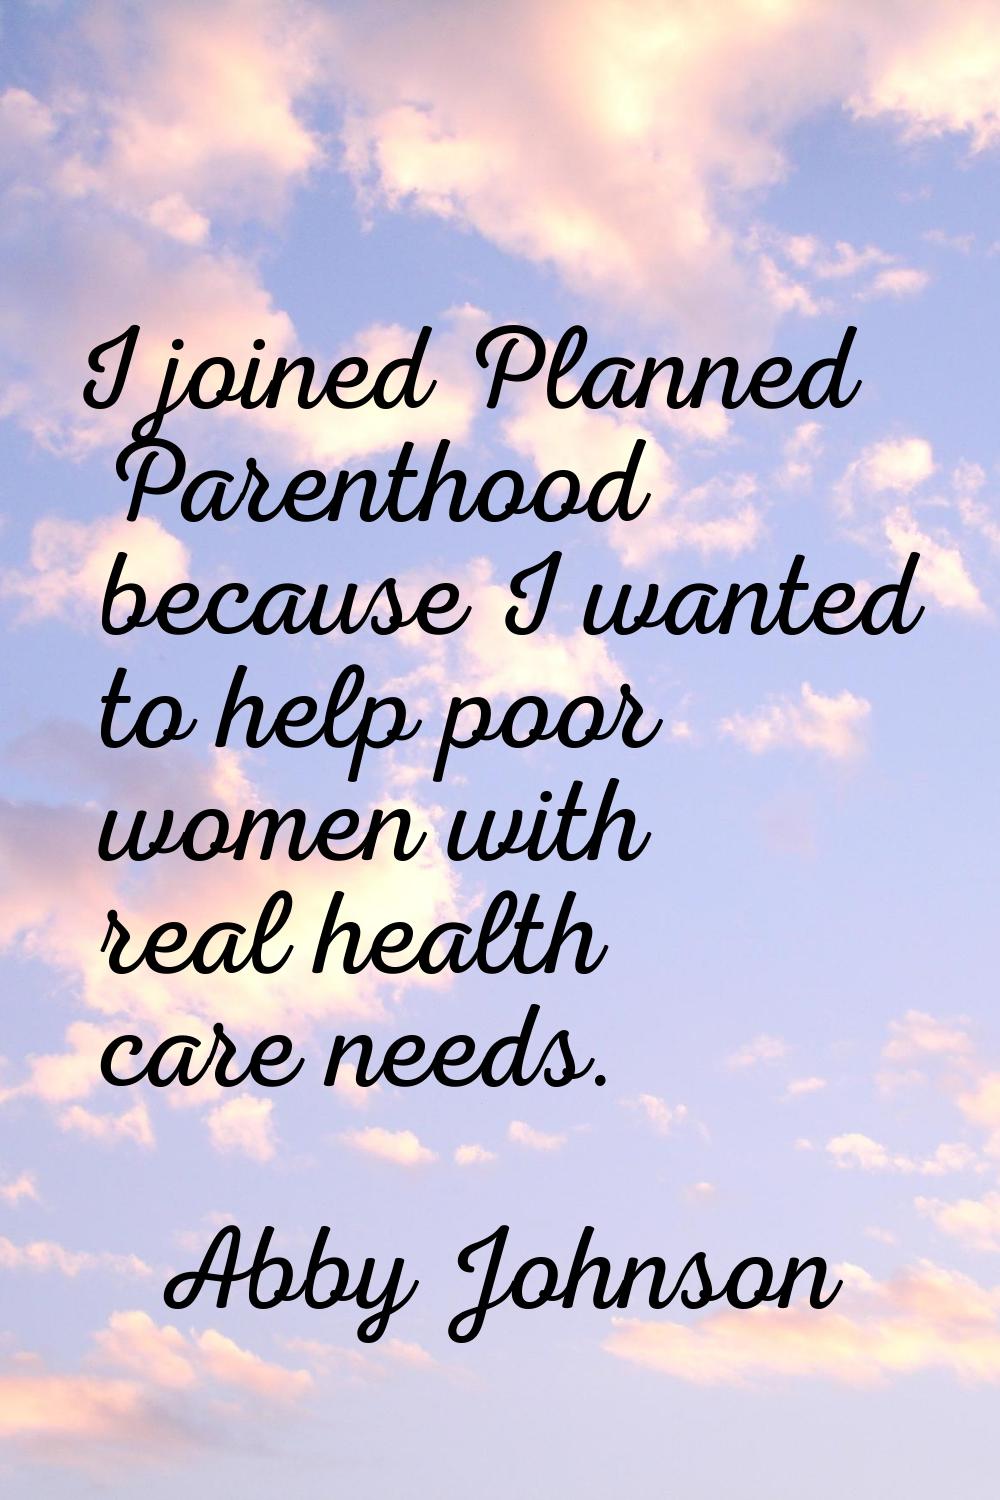 I joined Planned Parenthood because I wanted to help poor women with real health care needs.